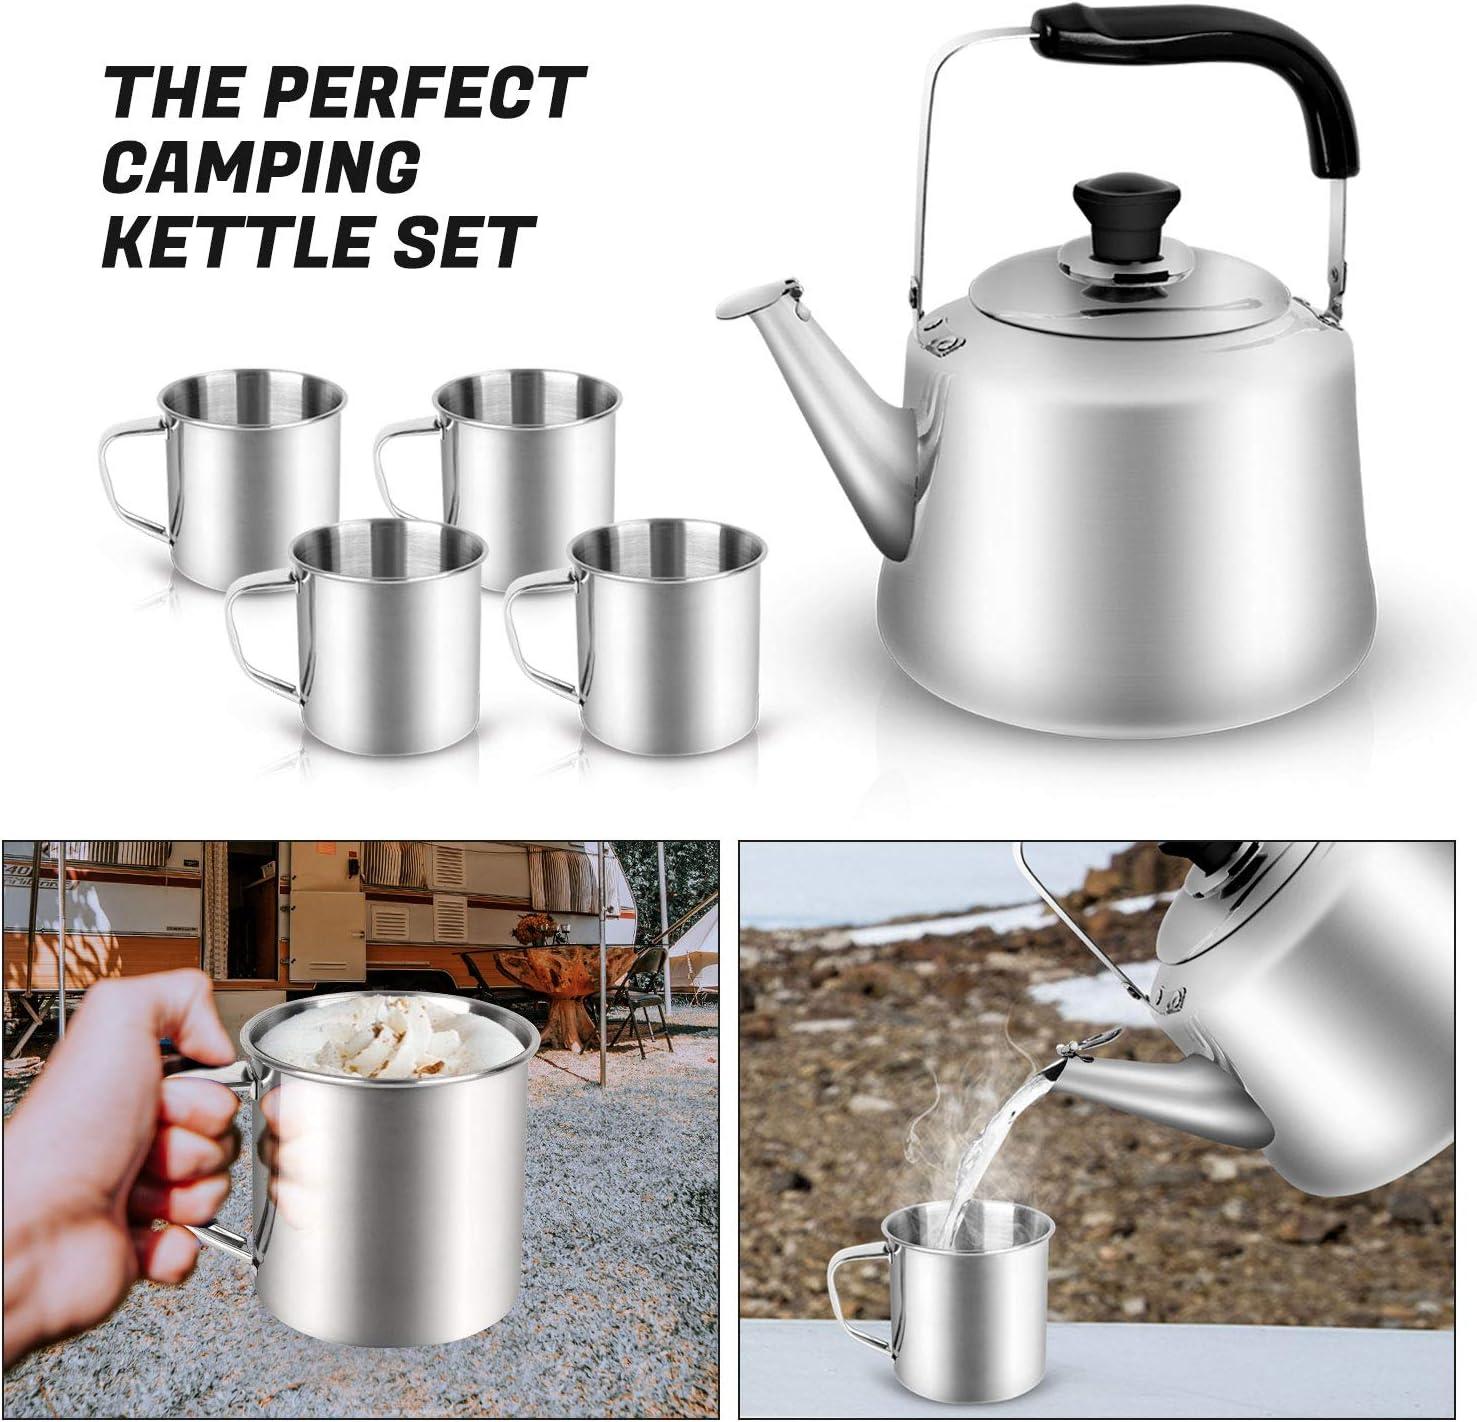 Orcamp Camping Kettle (1.4 L)